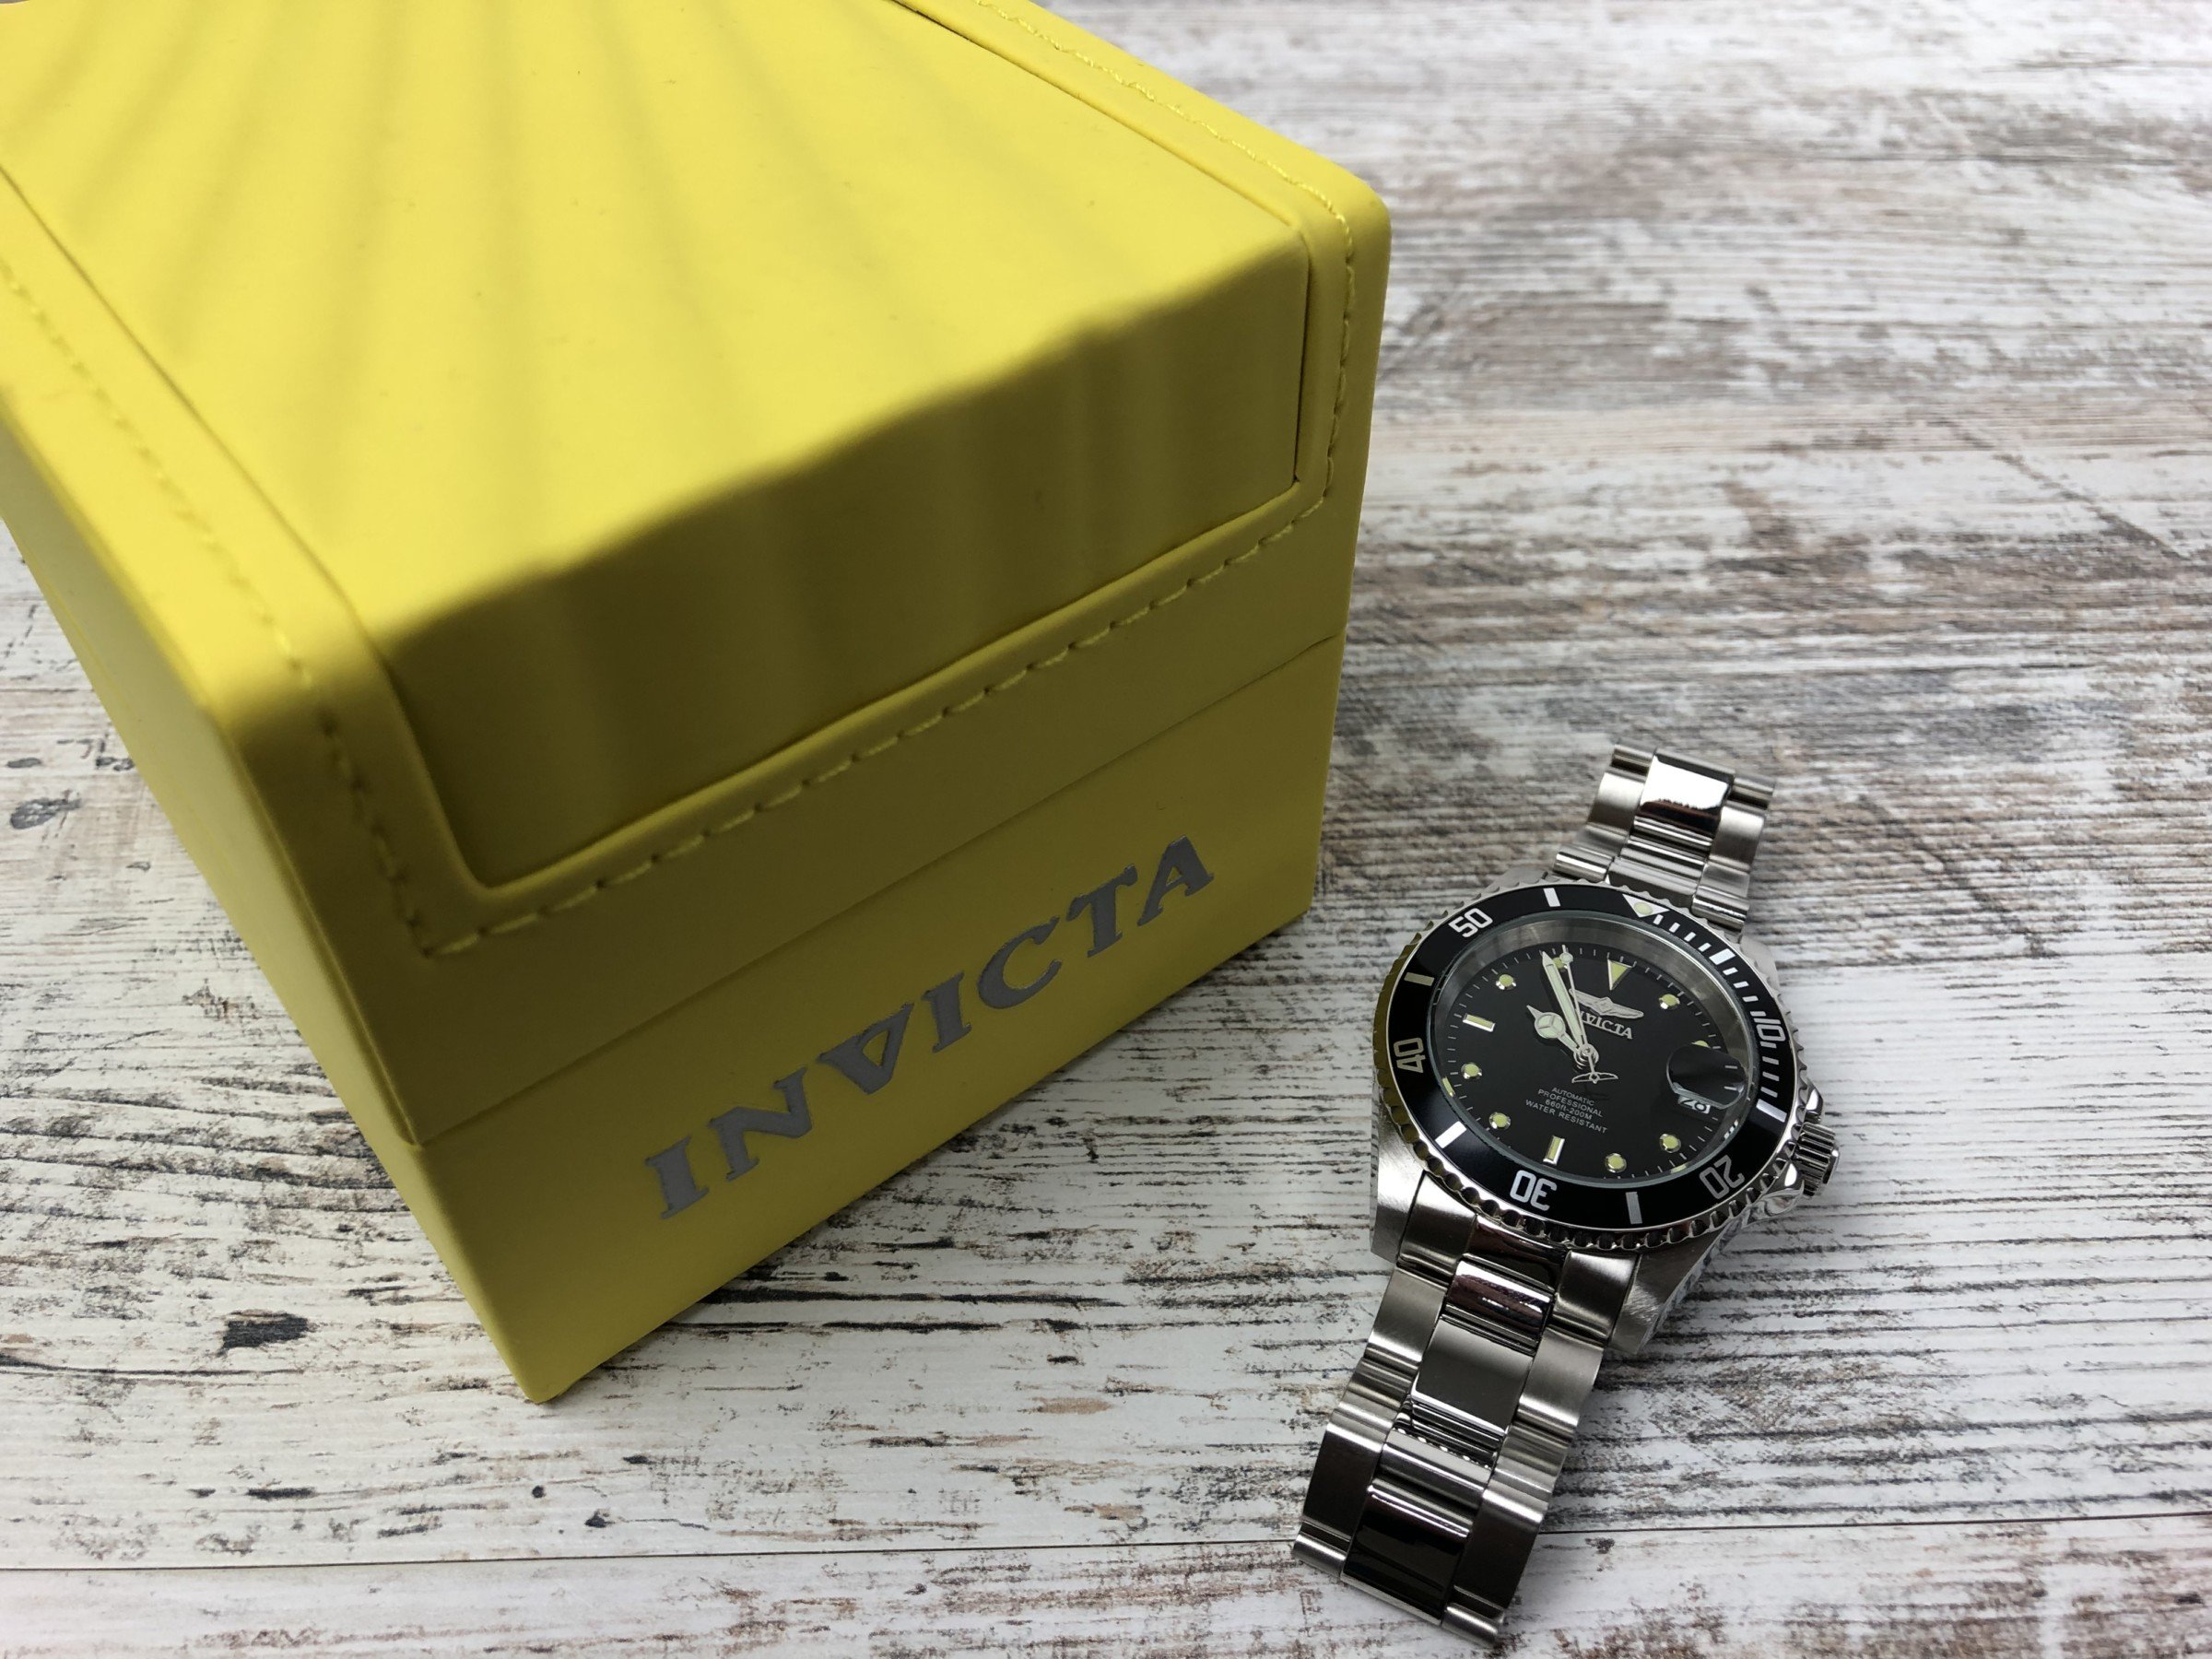 Invicta 8926OB Automatic Taucheruhr Test Hands On Review